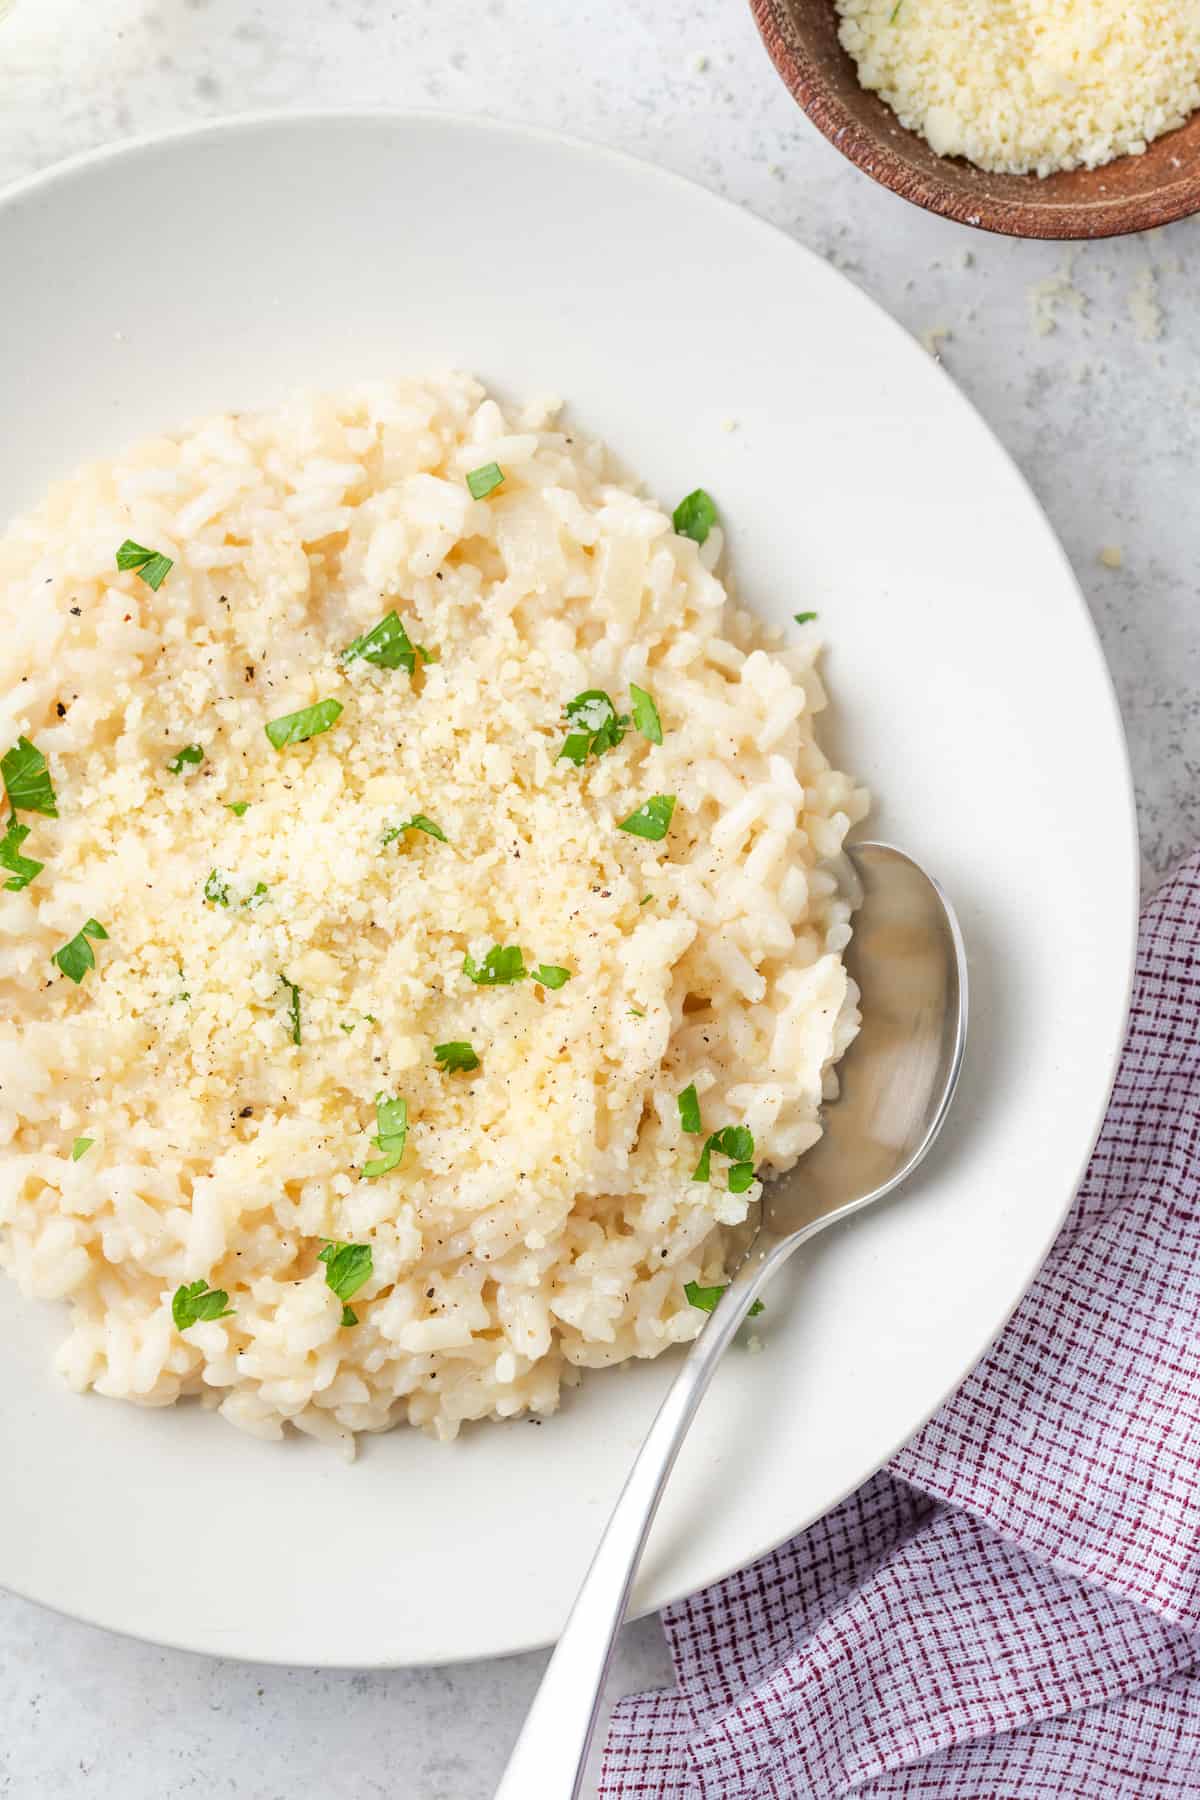 A spoon resting in a white bowl of risotto topped with Parmesan cheese, black pepper and chopped fresh parsley.